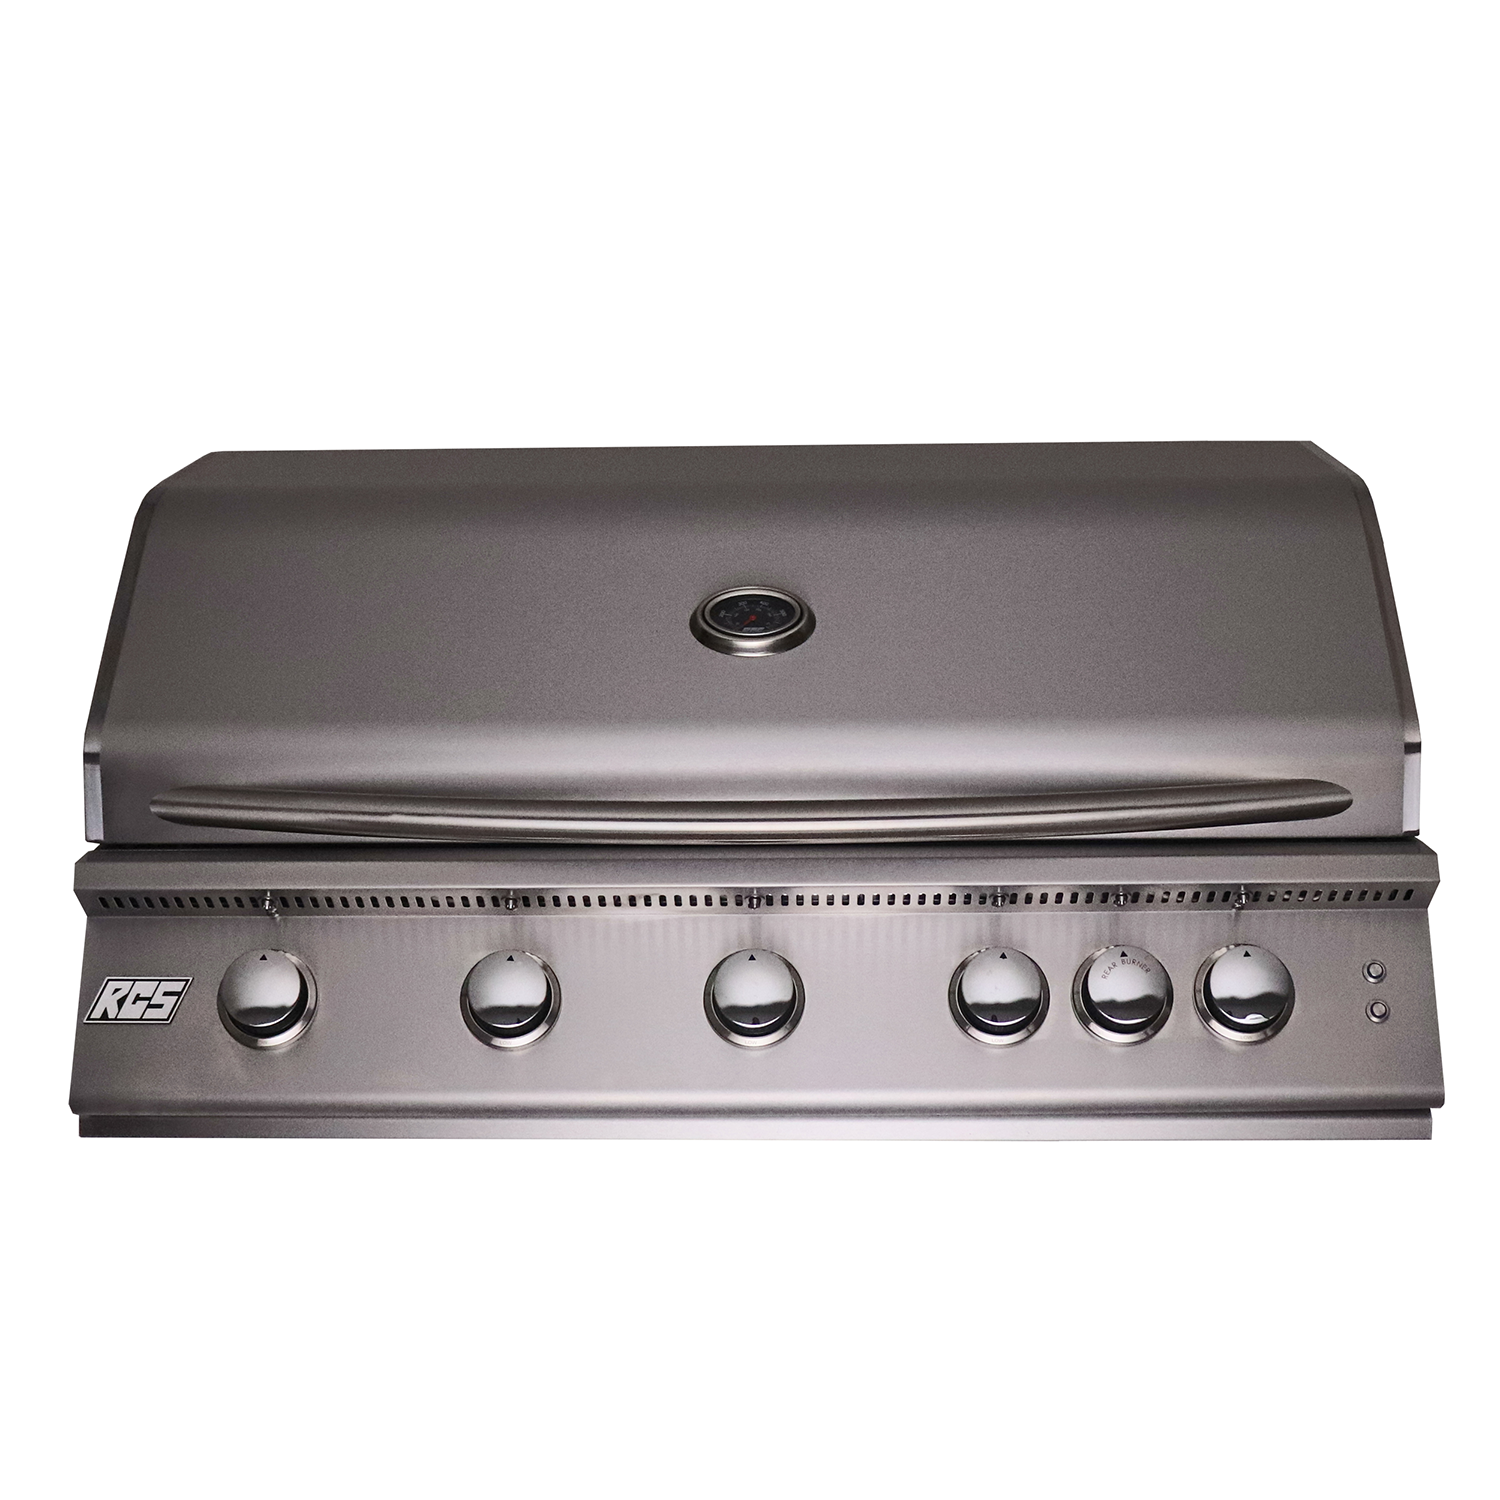 RCS Premier Series 40-Inch Built-In Propane Gas Grill With Rear Infrared Burner - RJC40ALP